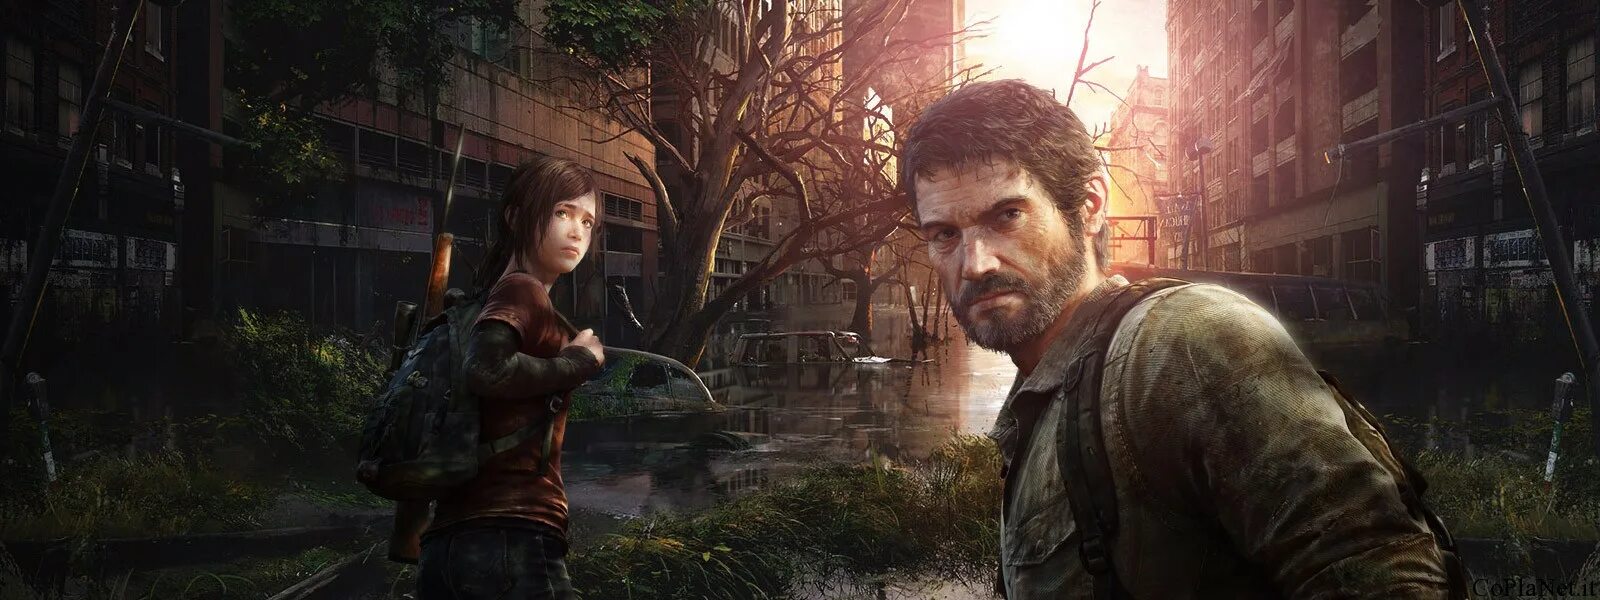 The last of us. The last of us игра. The last of us 2013. Ласт оф ас 2 пк дата выхода